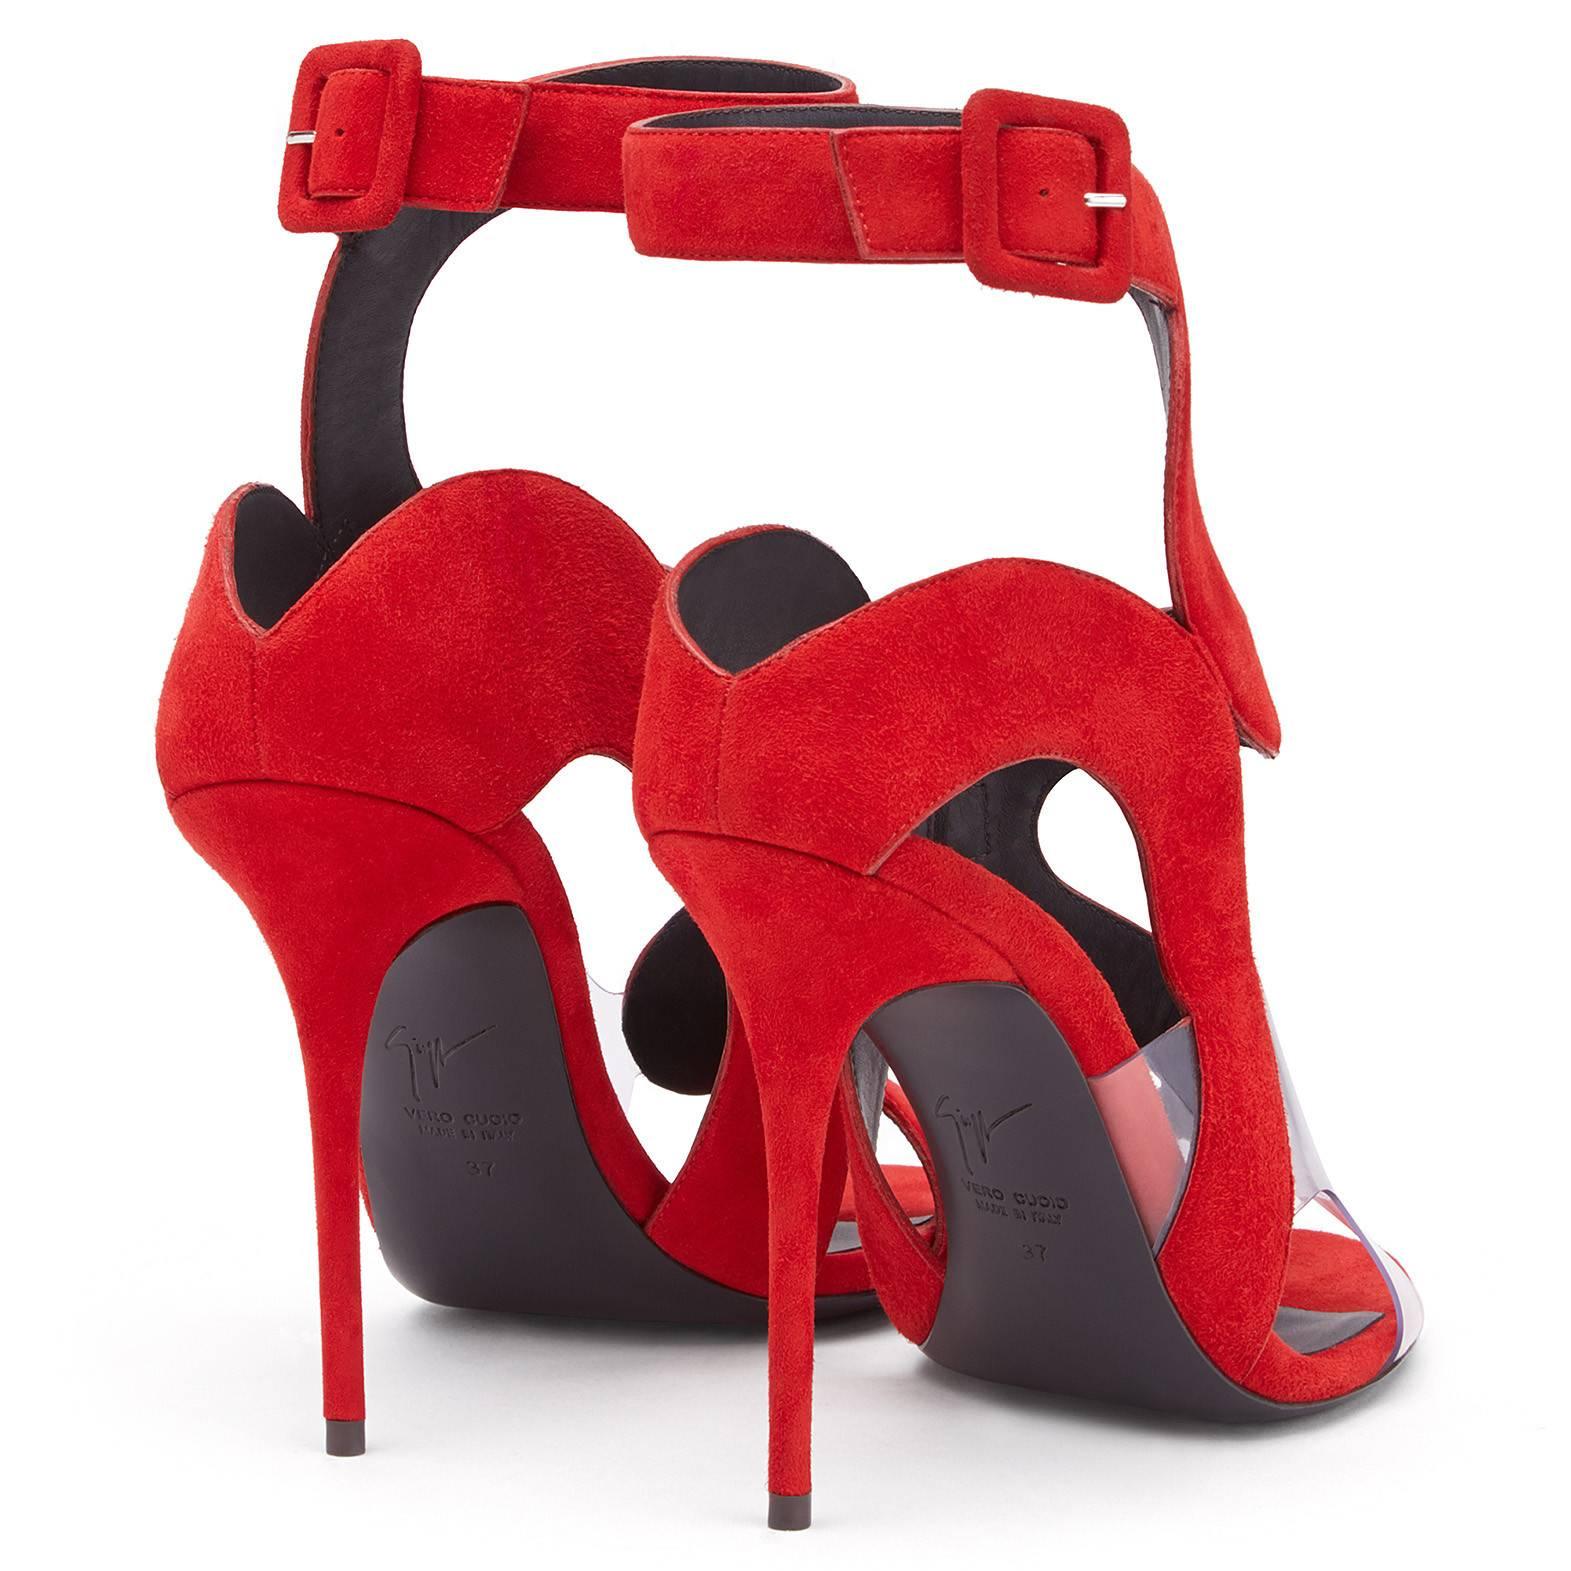 Giuseppe Zanotti NEW Red Suede Cut Out Clear PVC Evening Sandals Heels in Box 1